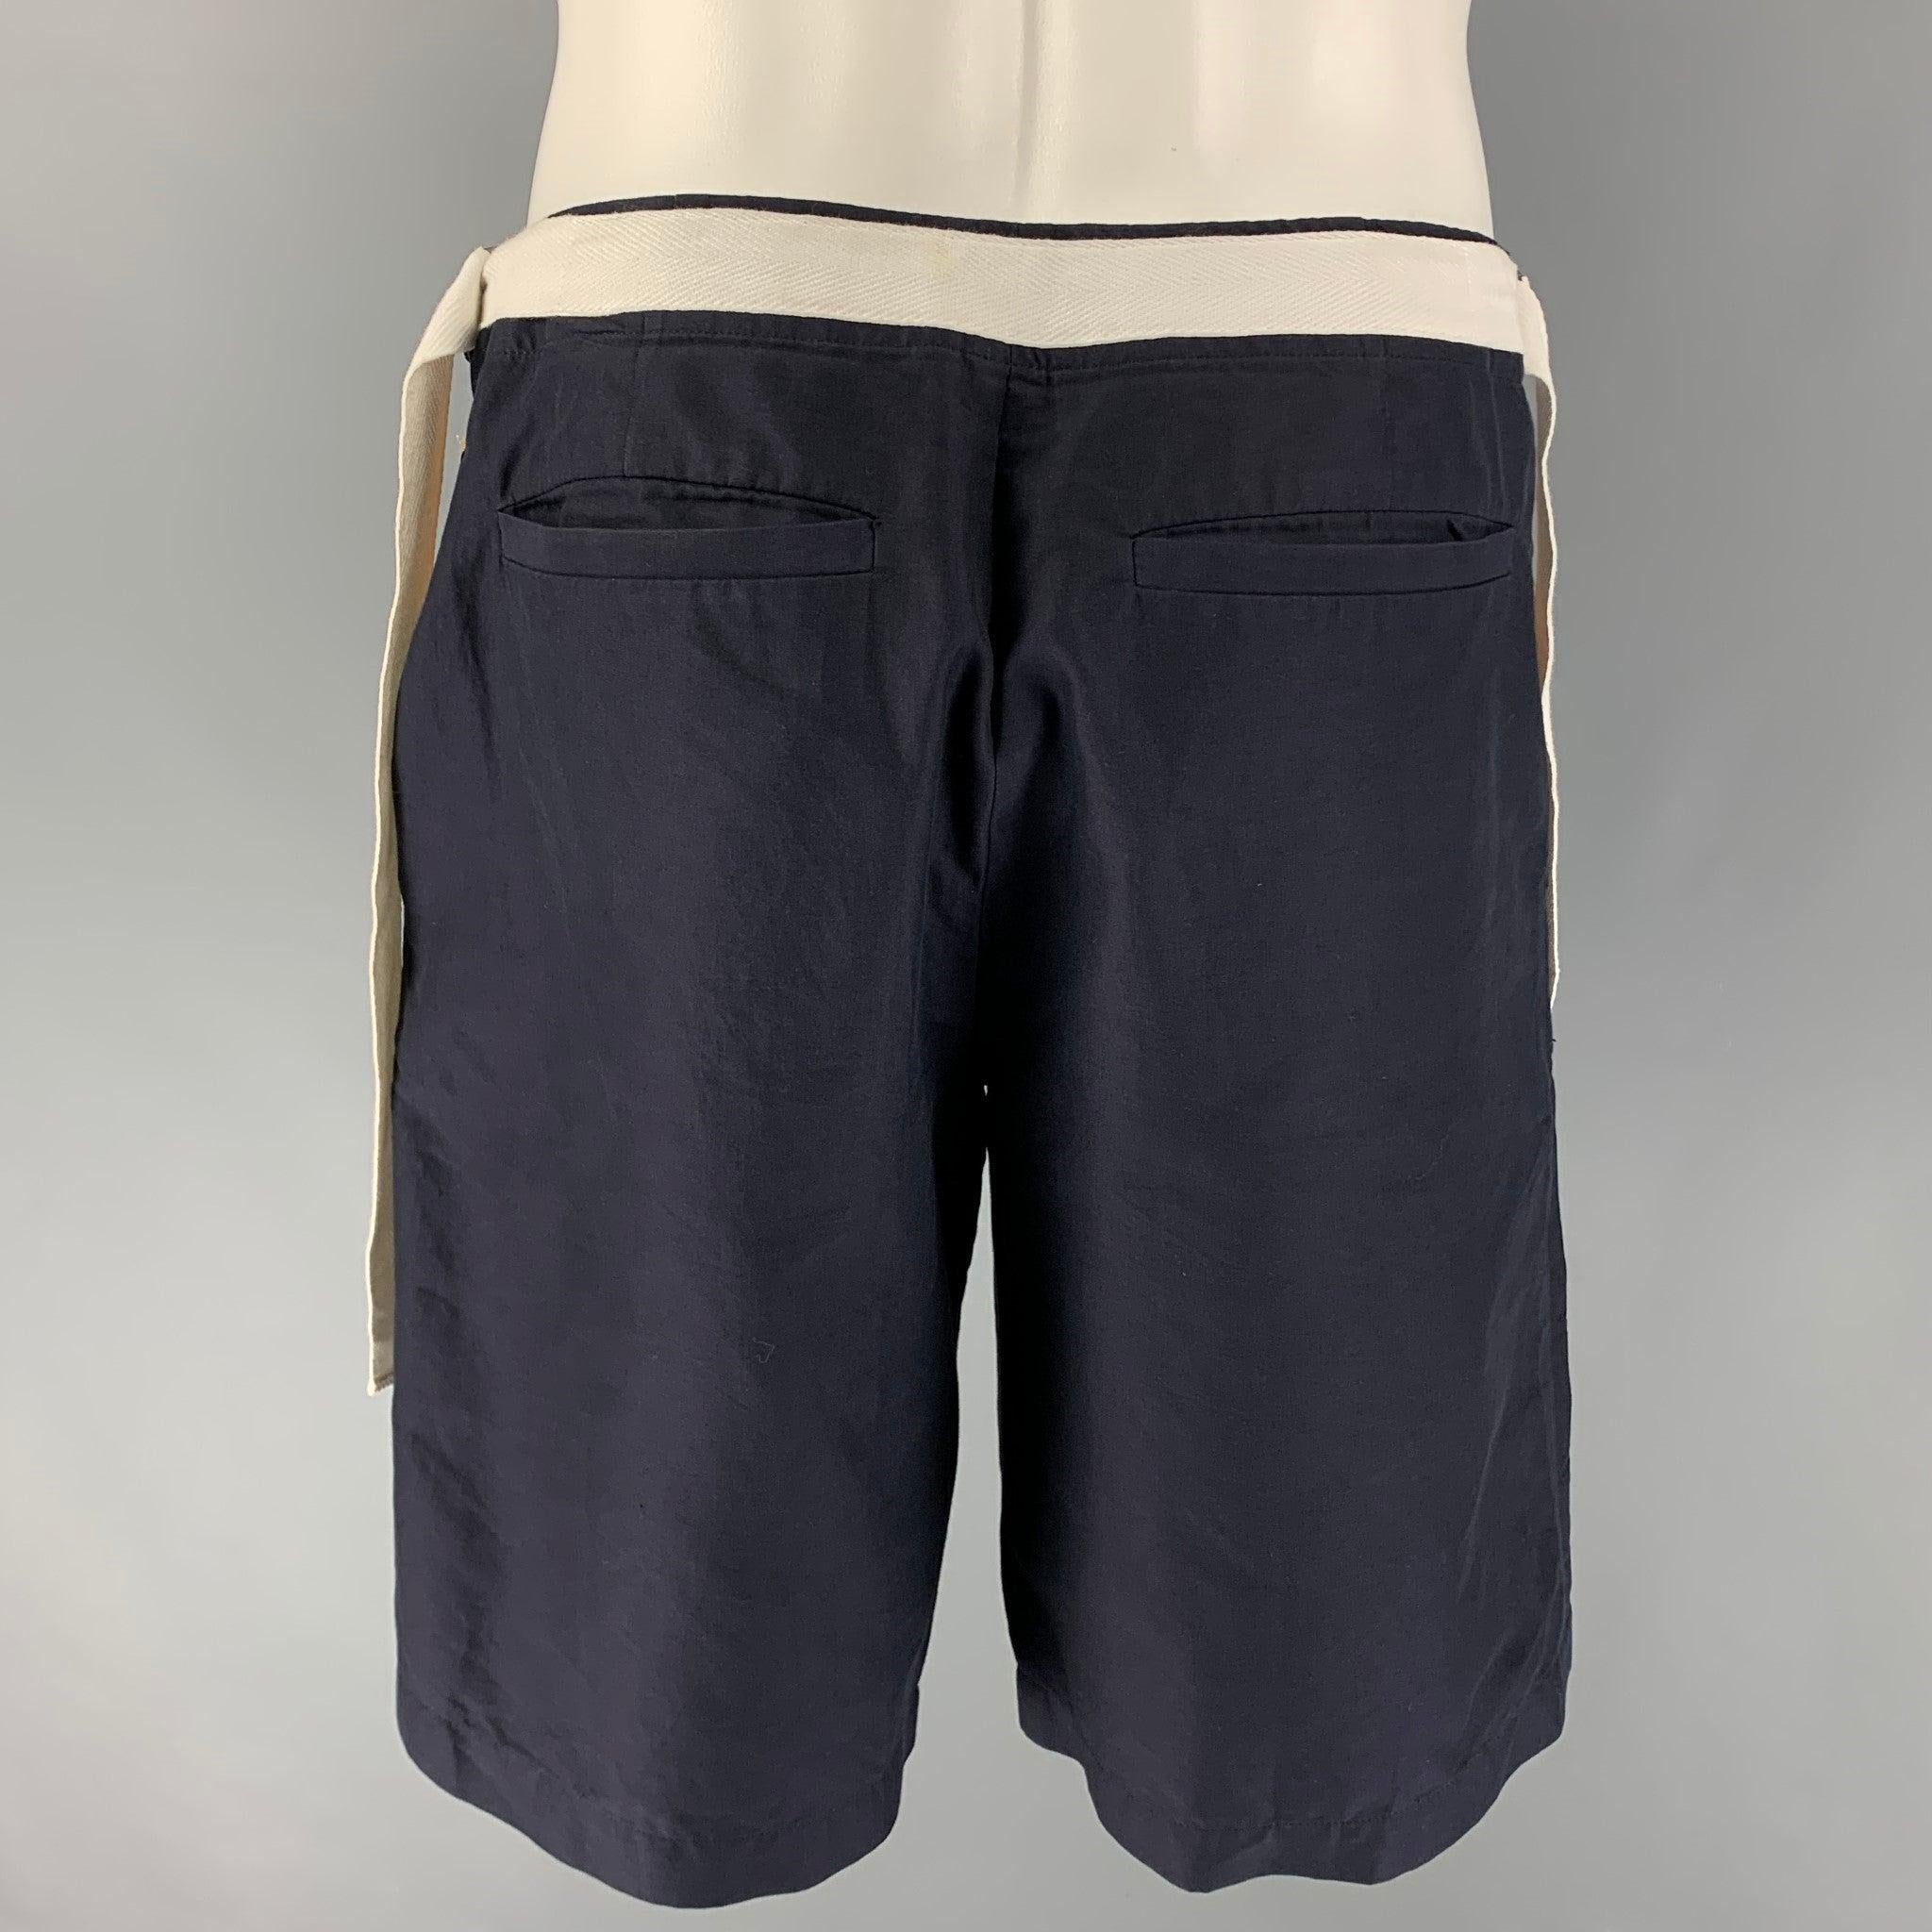 DRIES VAN NOTEN Size 32 Navy Gold Color Block Cotton Drawstring Shorts In Good Condition For Sale In San Francisco, CA